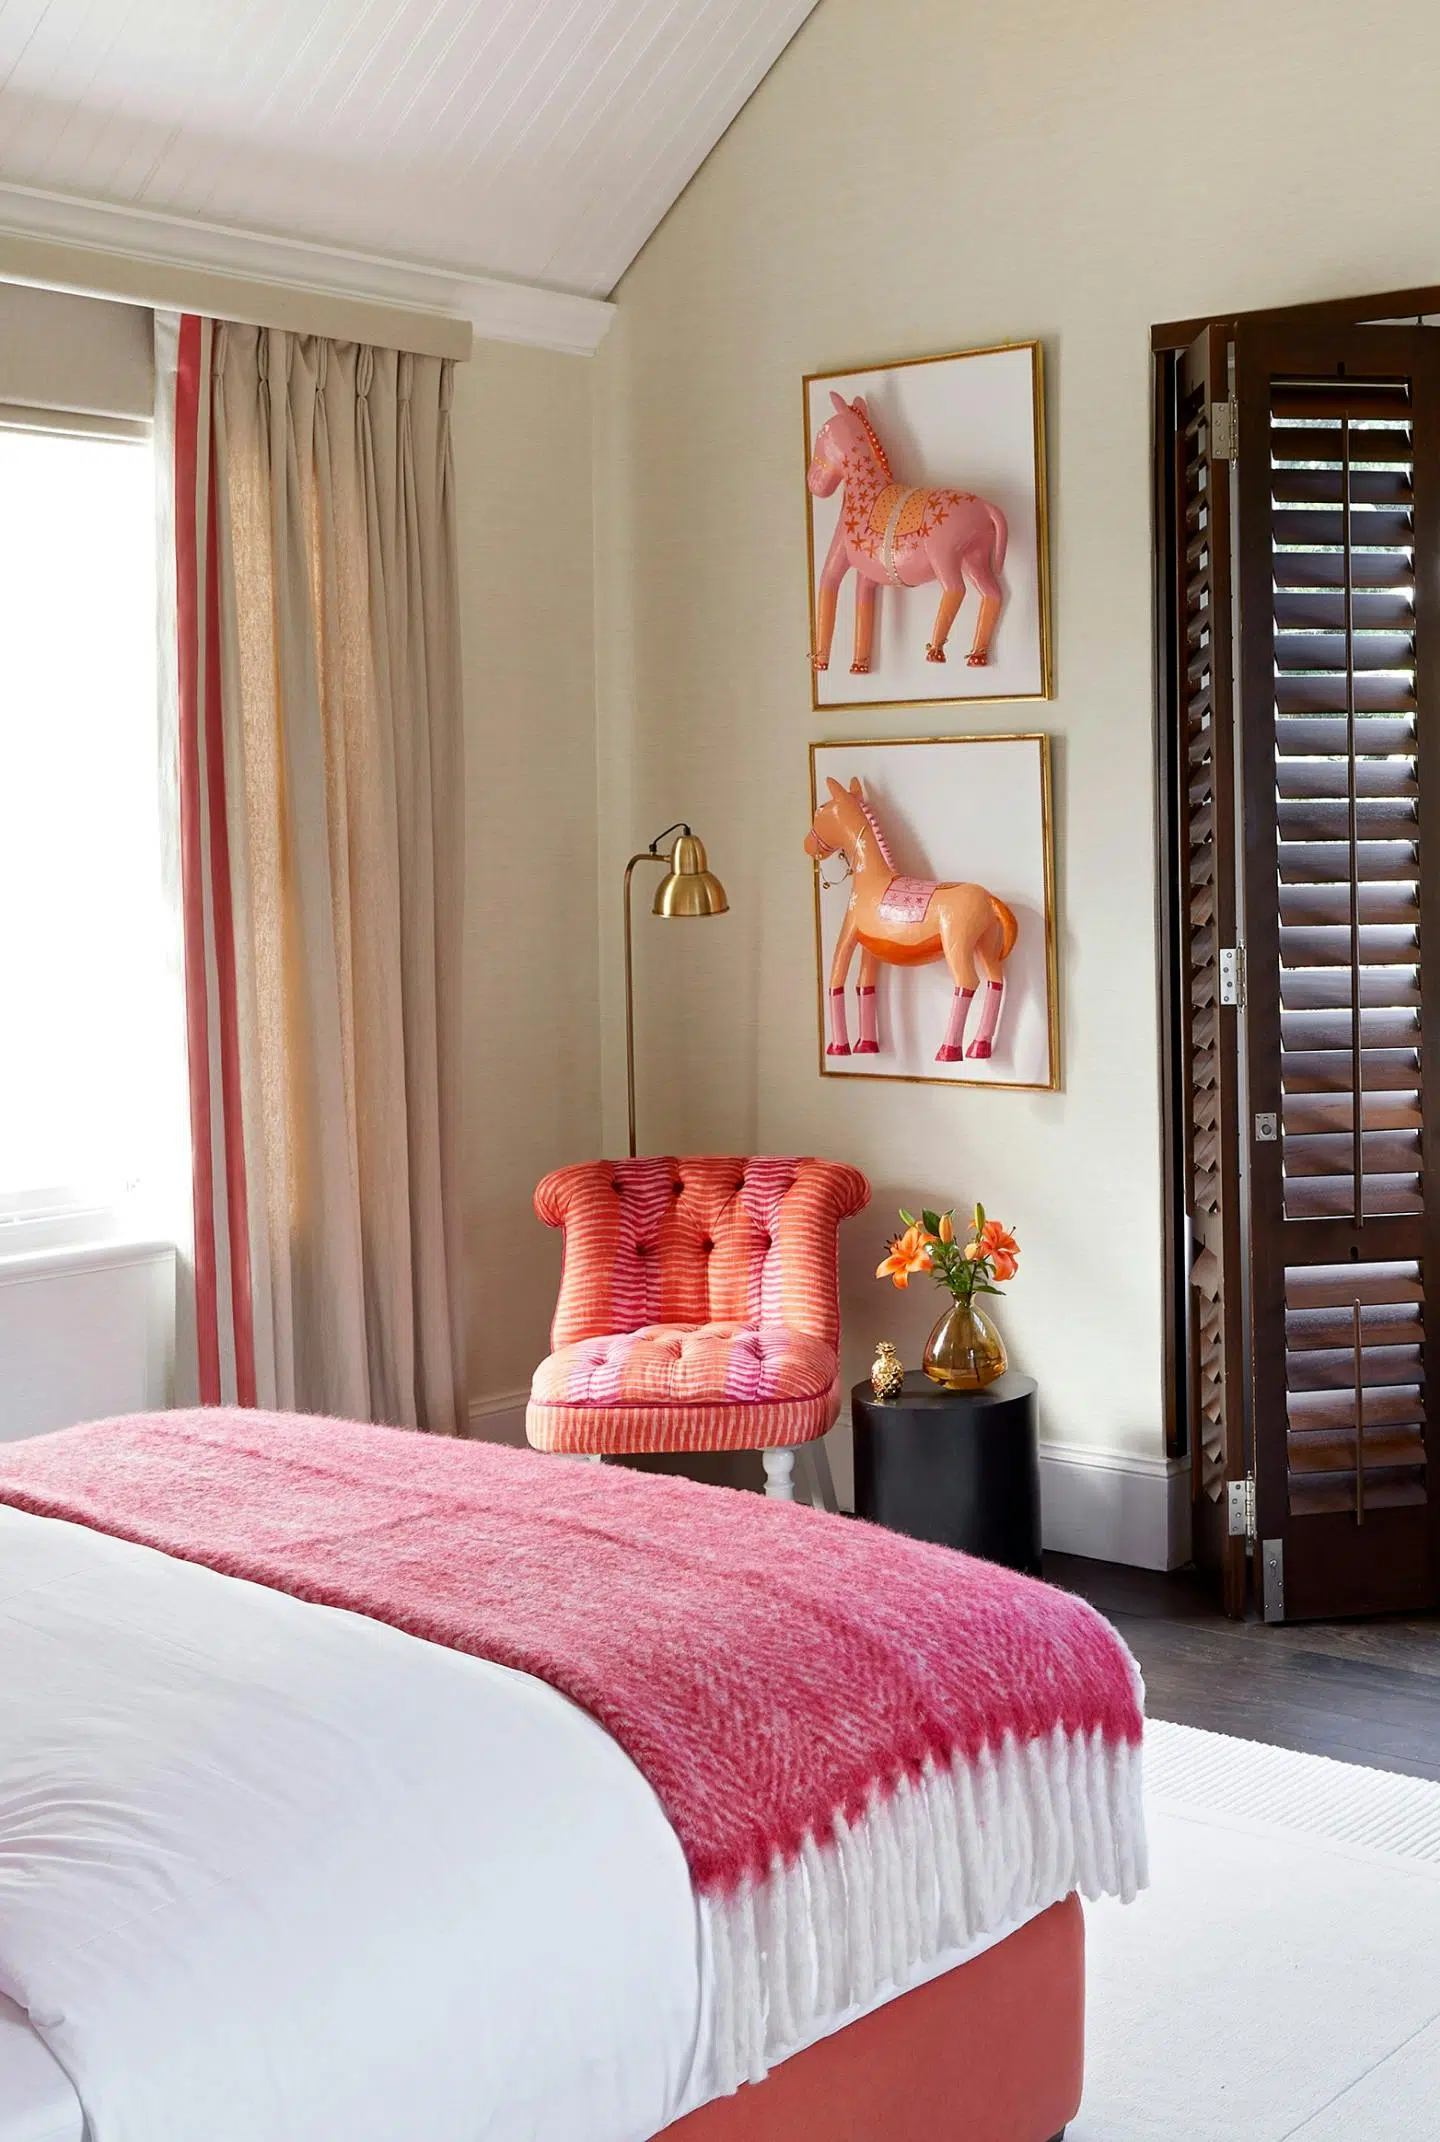 Close-up of a child's bedroom with pink and white bedding and frames on the wall with 3D horses, also in pink.